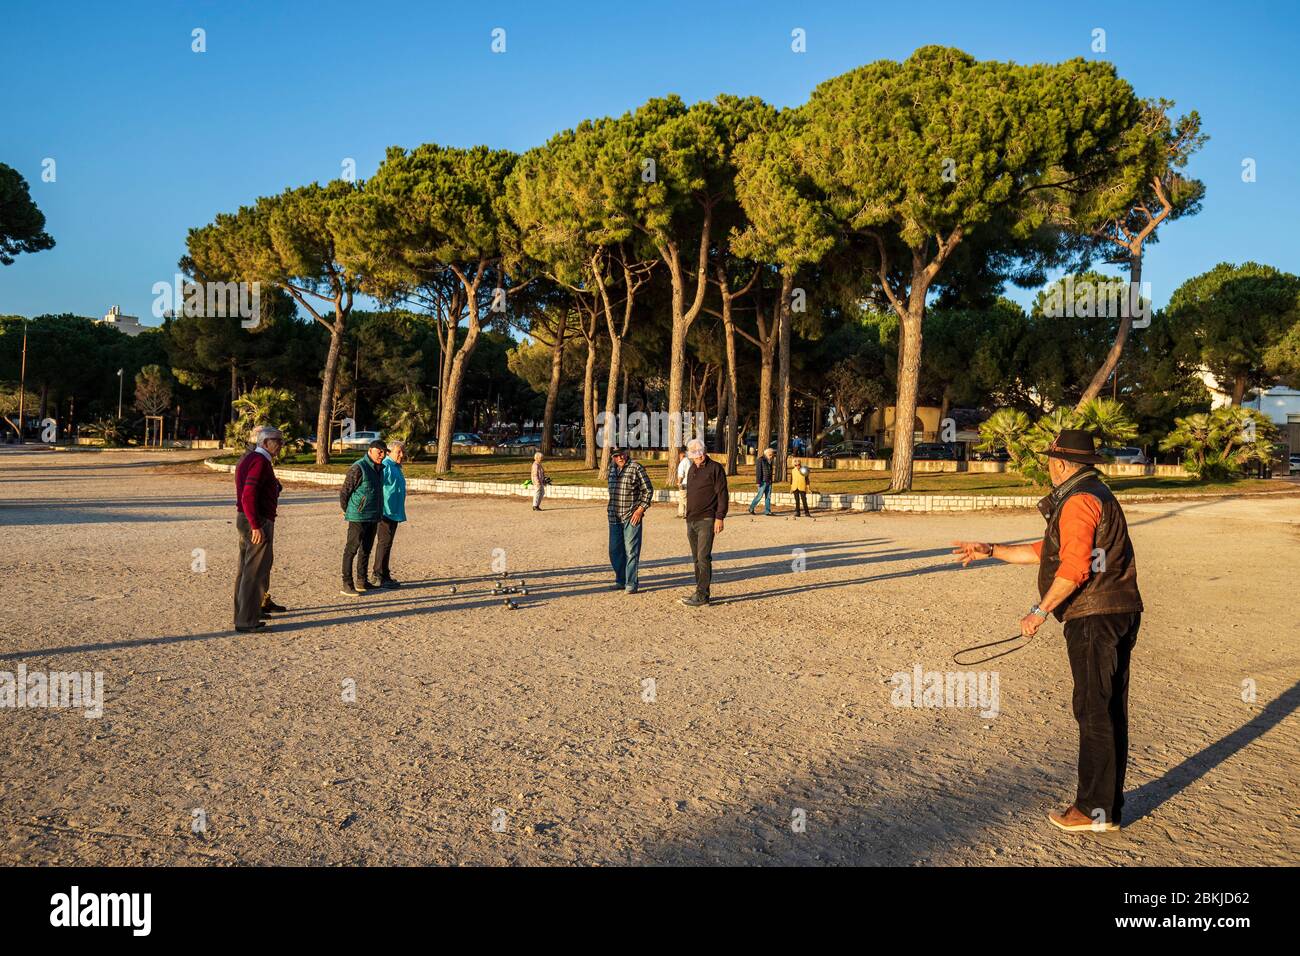 France, Alpes-Maritimes, Antibes, Juan-les-Pins, square Frank Jay Gould, game of pétanque or lawn bowling Stock Photo